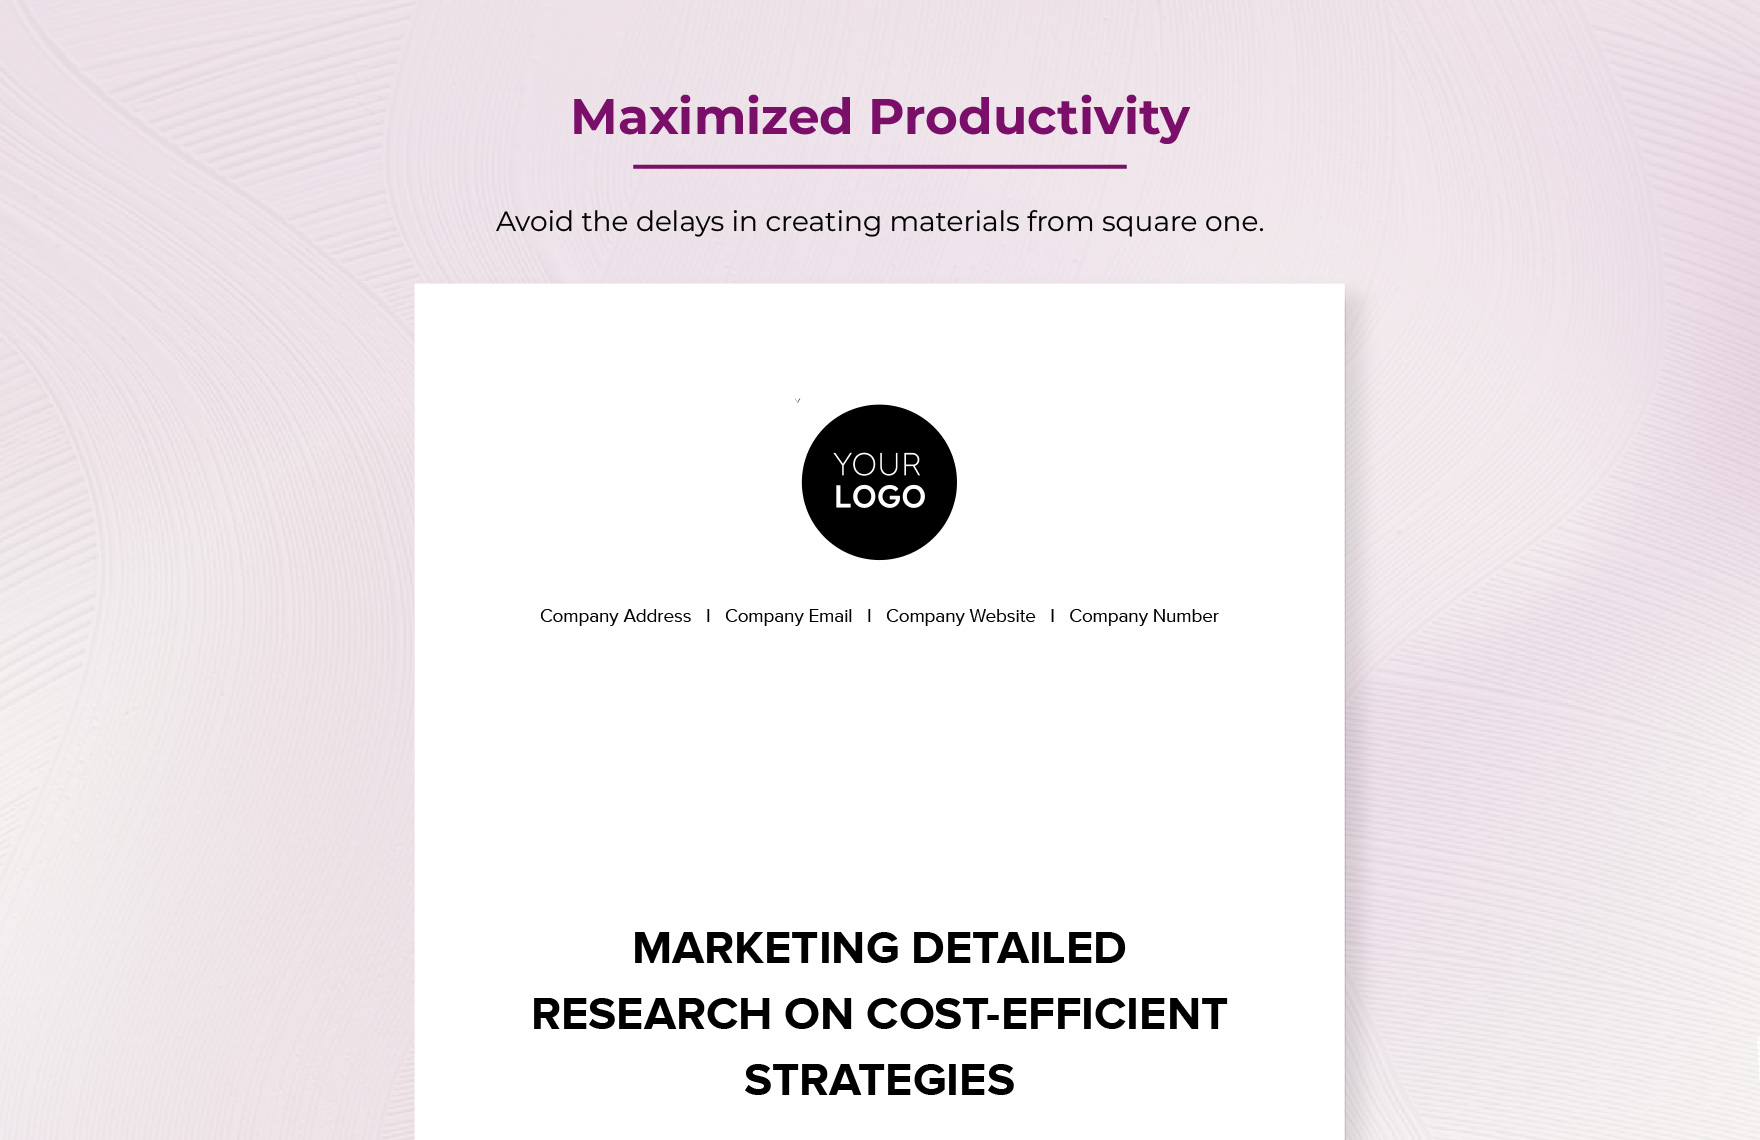 Marketing Detailed Research on Cost-Efficient Strategies Template